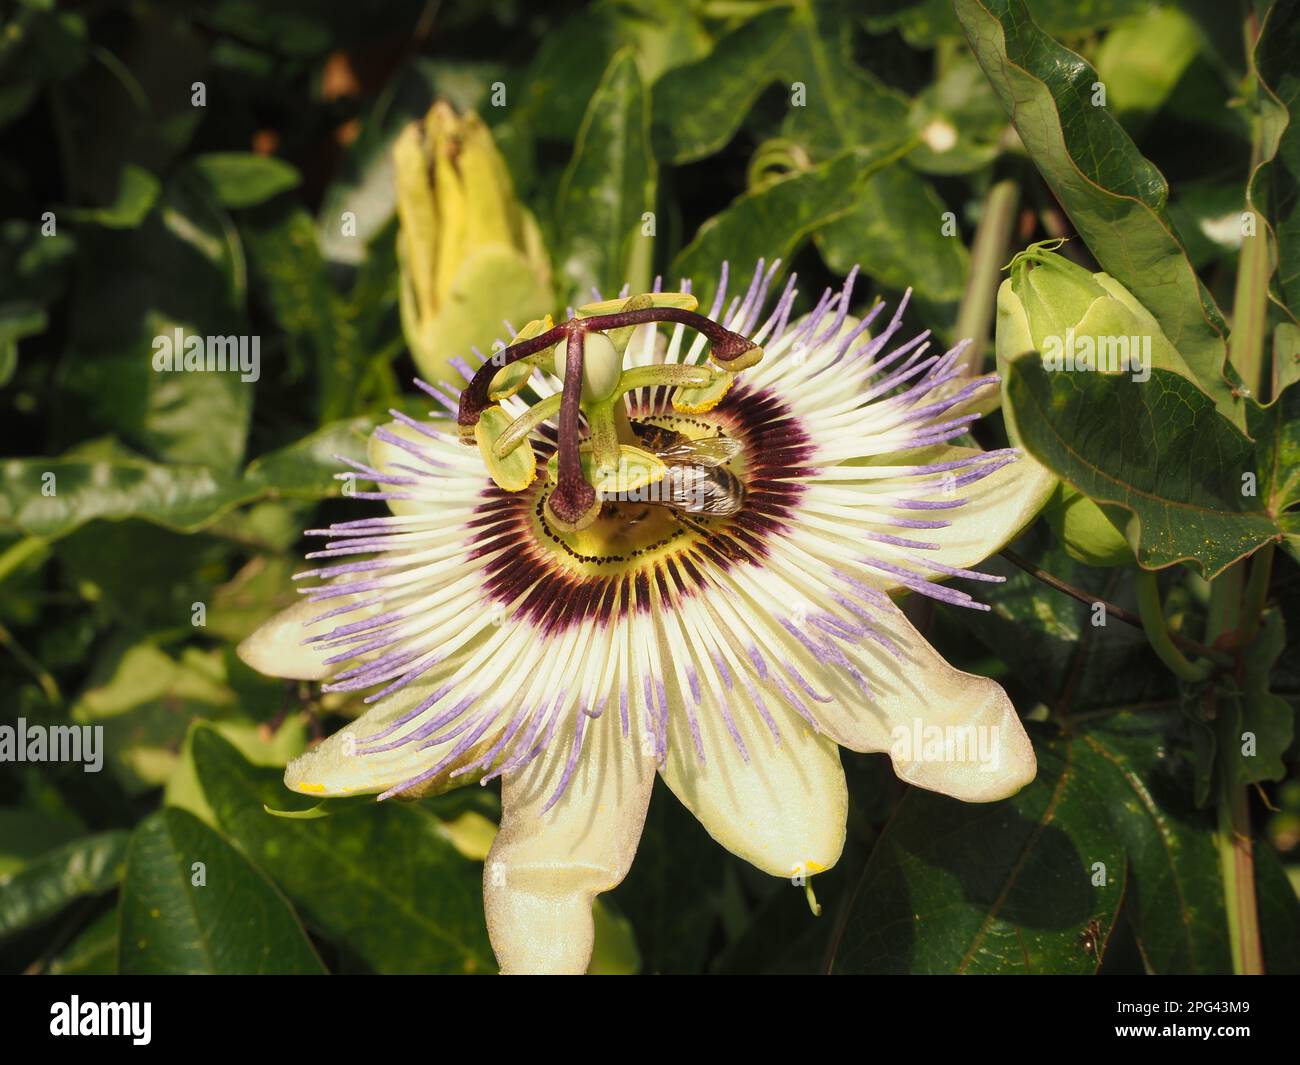 Blue passion fruit flower (passiflora caerulea) in an English garden. The flower is the national flower of Paraguay. Stock Photo